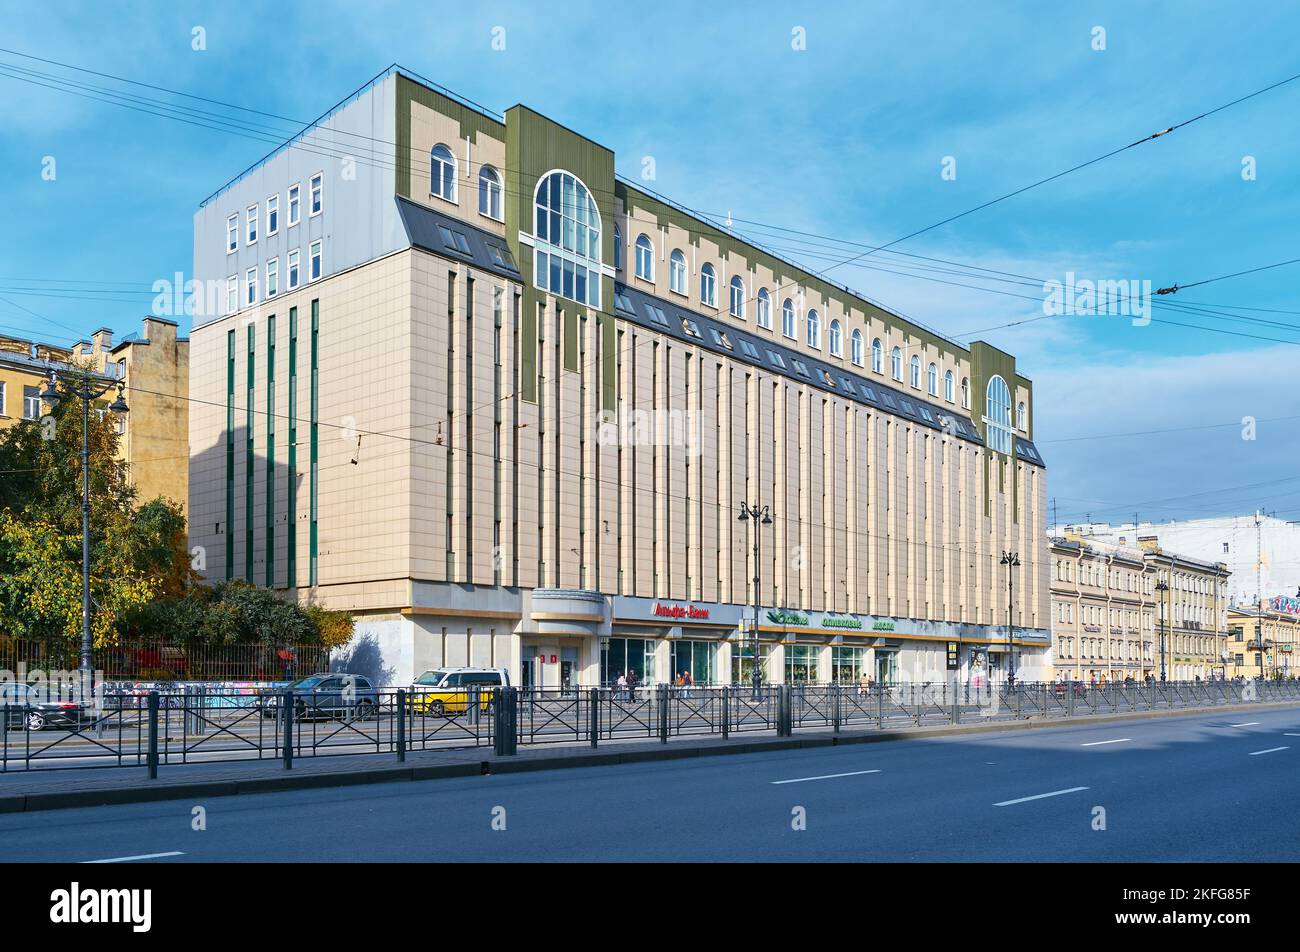 A view of the building of the Bakery Products Plant - Experimental Bakery Ligovka - Business Center Ligovka, built in 1979: St. Petersburg, Russia - O Stock Photo